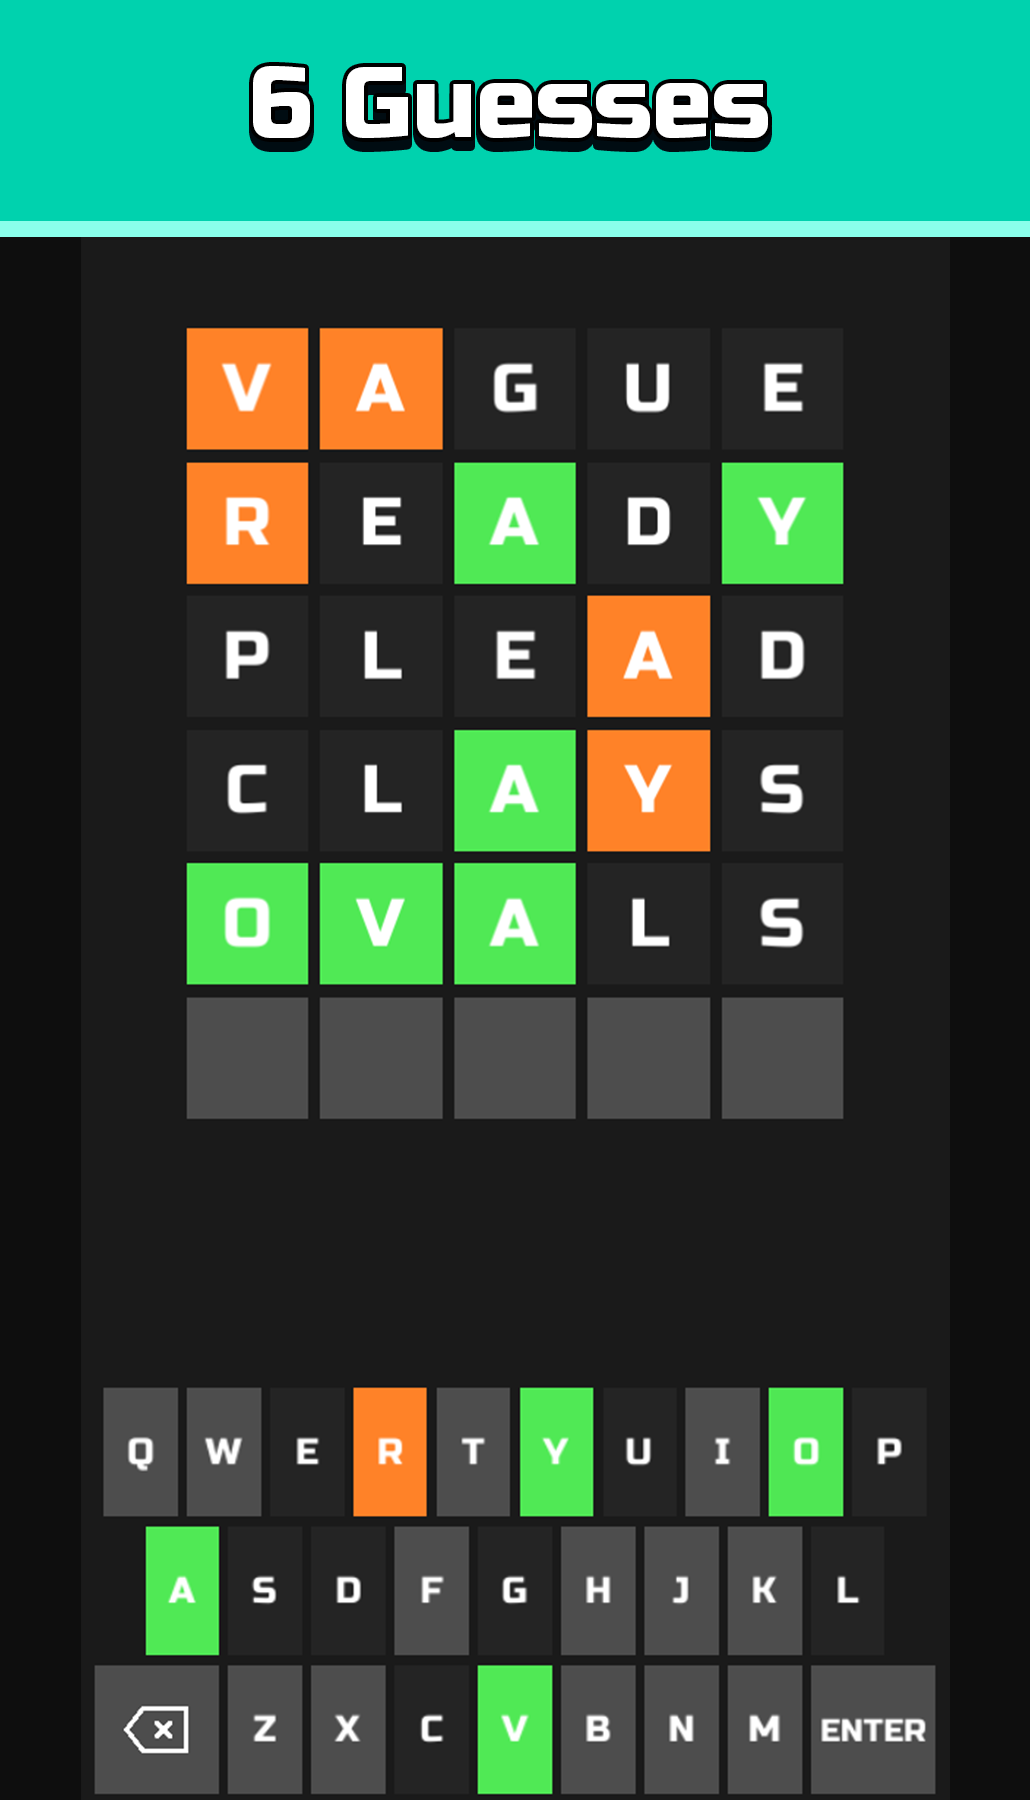 Wordly - Daily Word Puzzle screenshot game